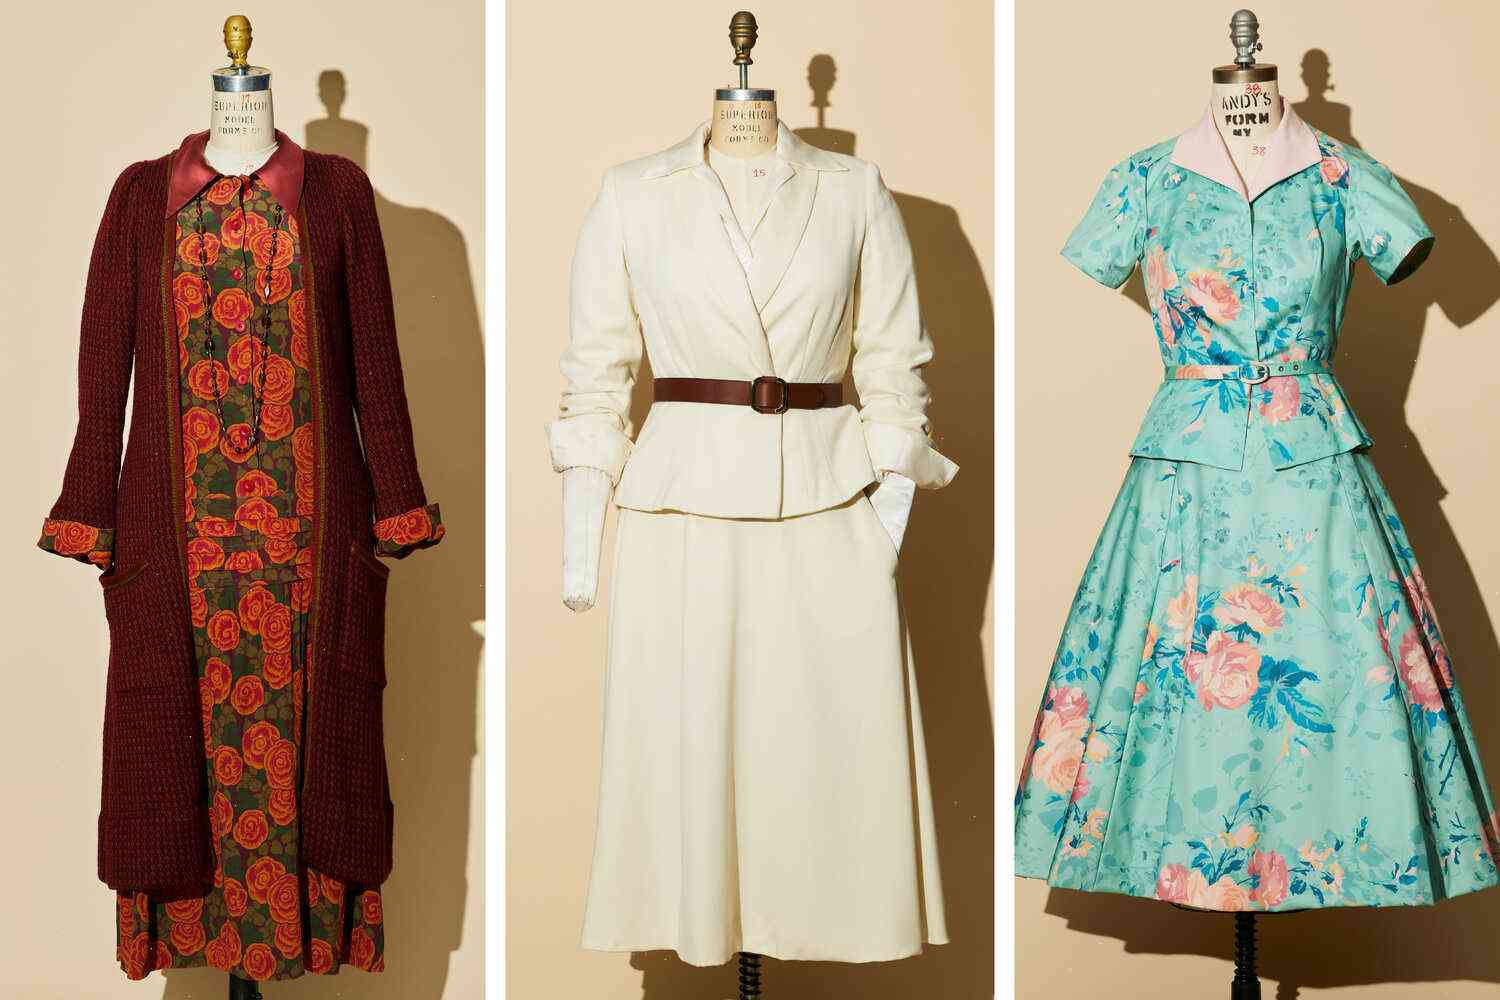 The Met’s Costume Institute is Bringing History to Life